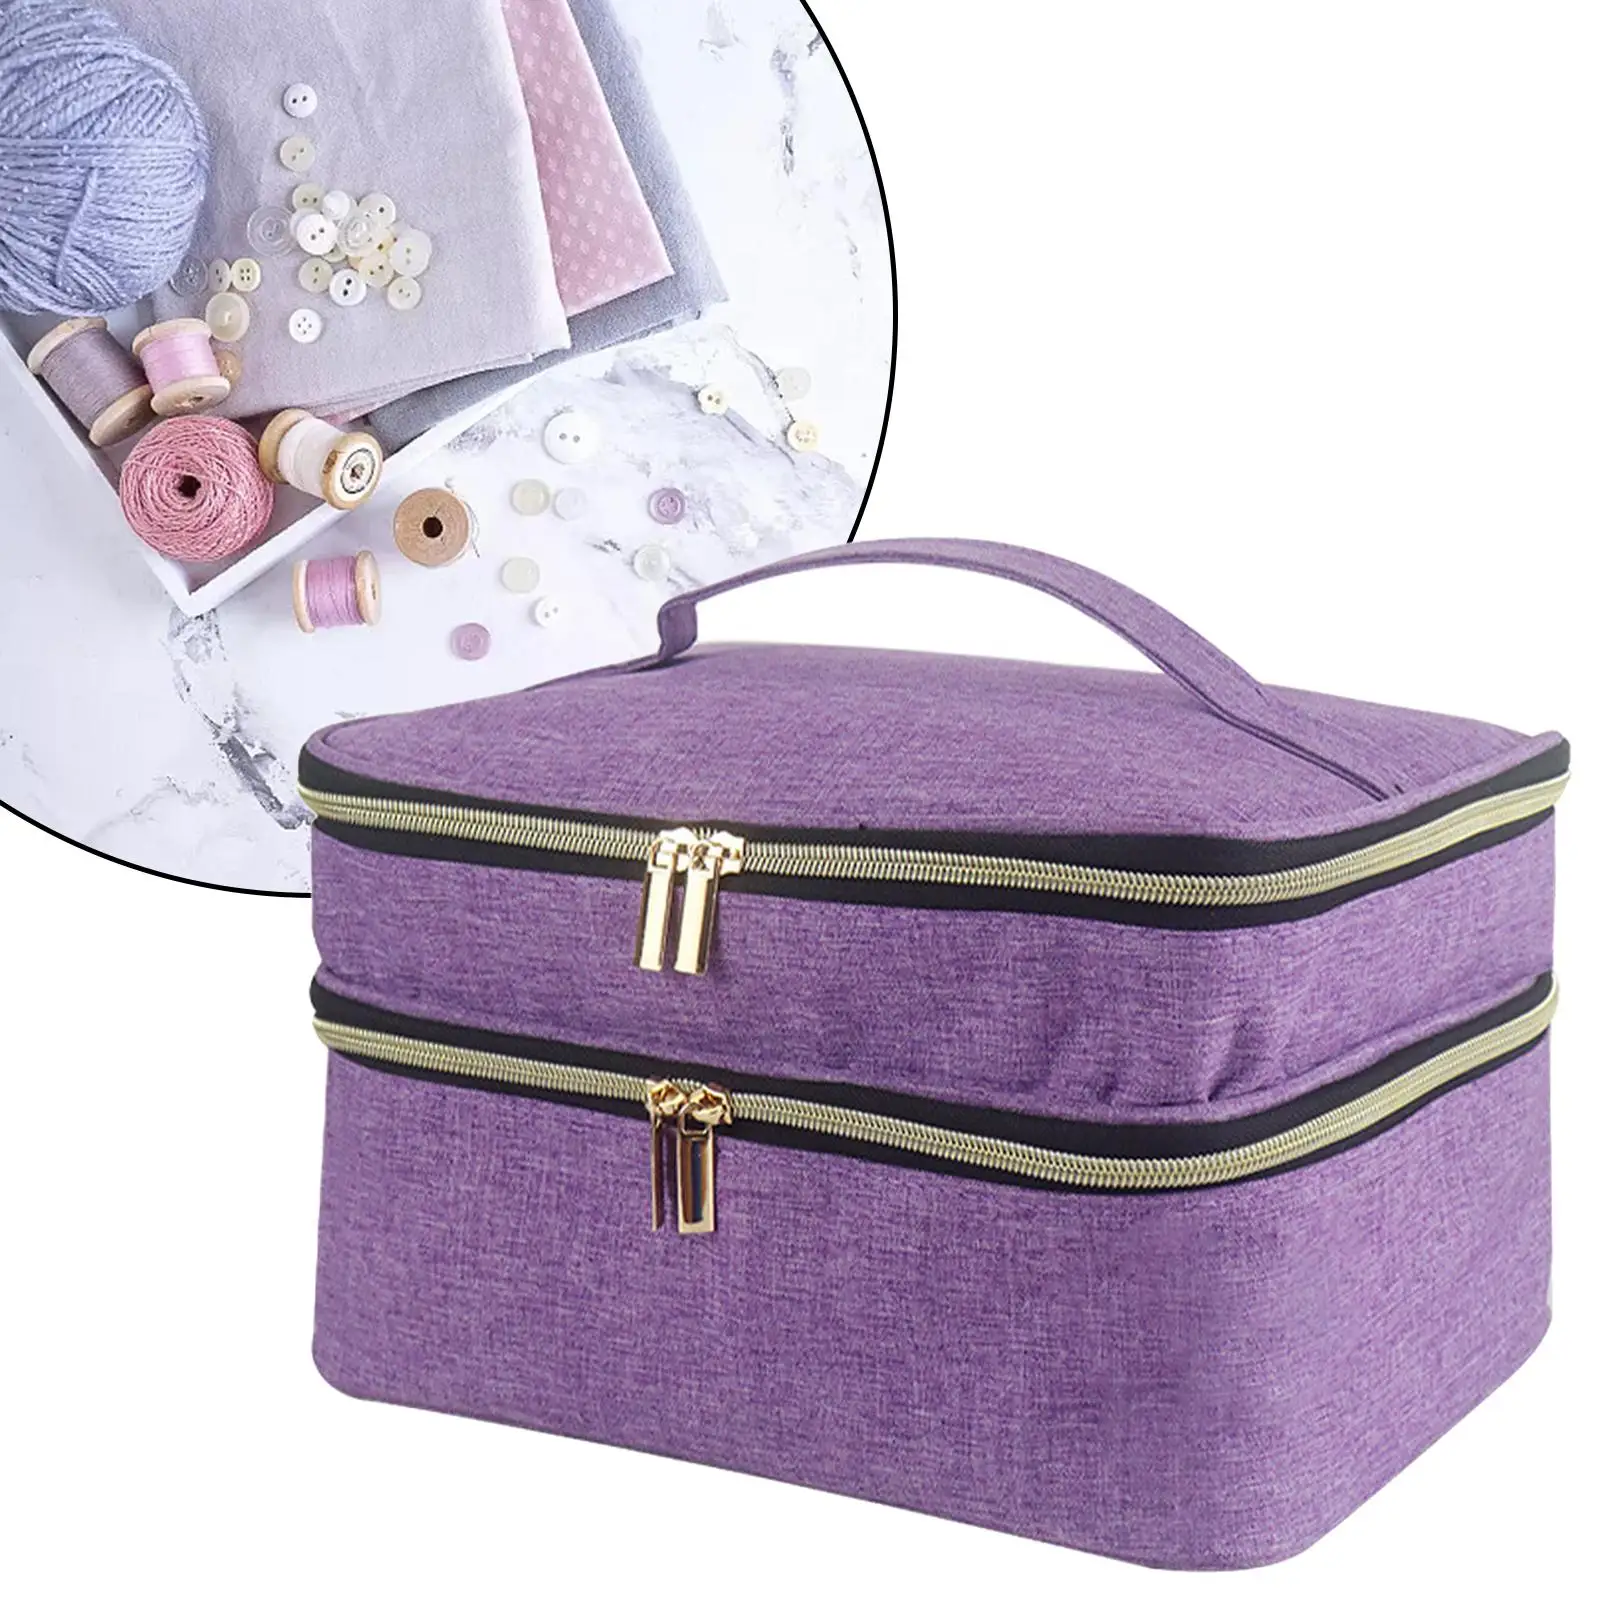 Sewing Storage Organizer Portable for Pins Thread Buttons